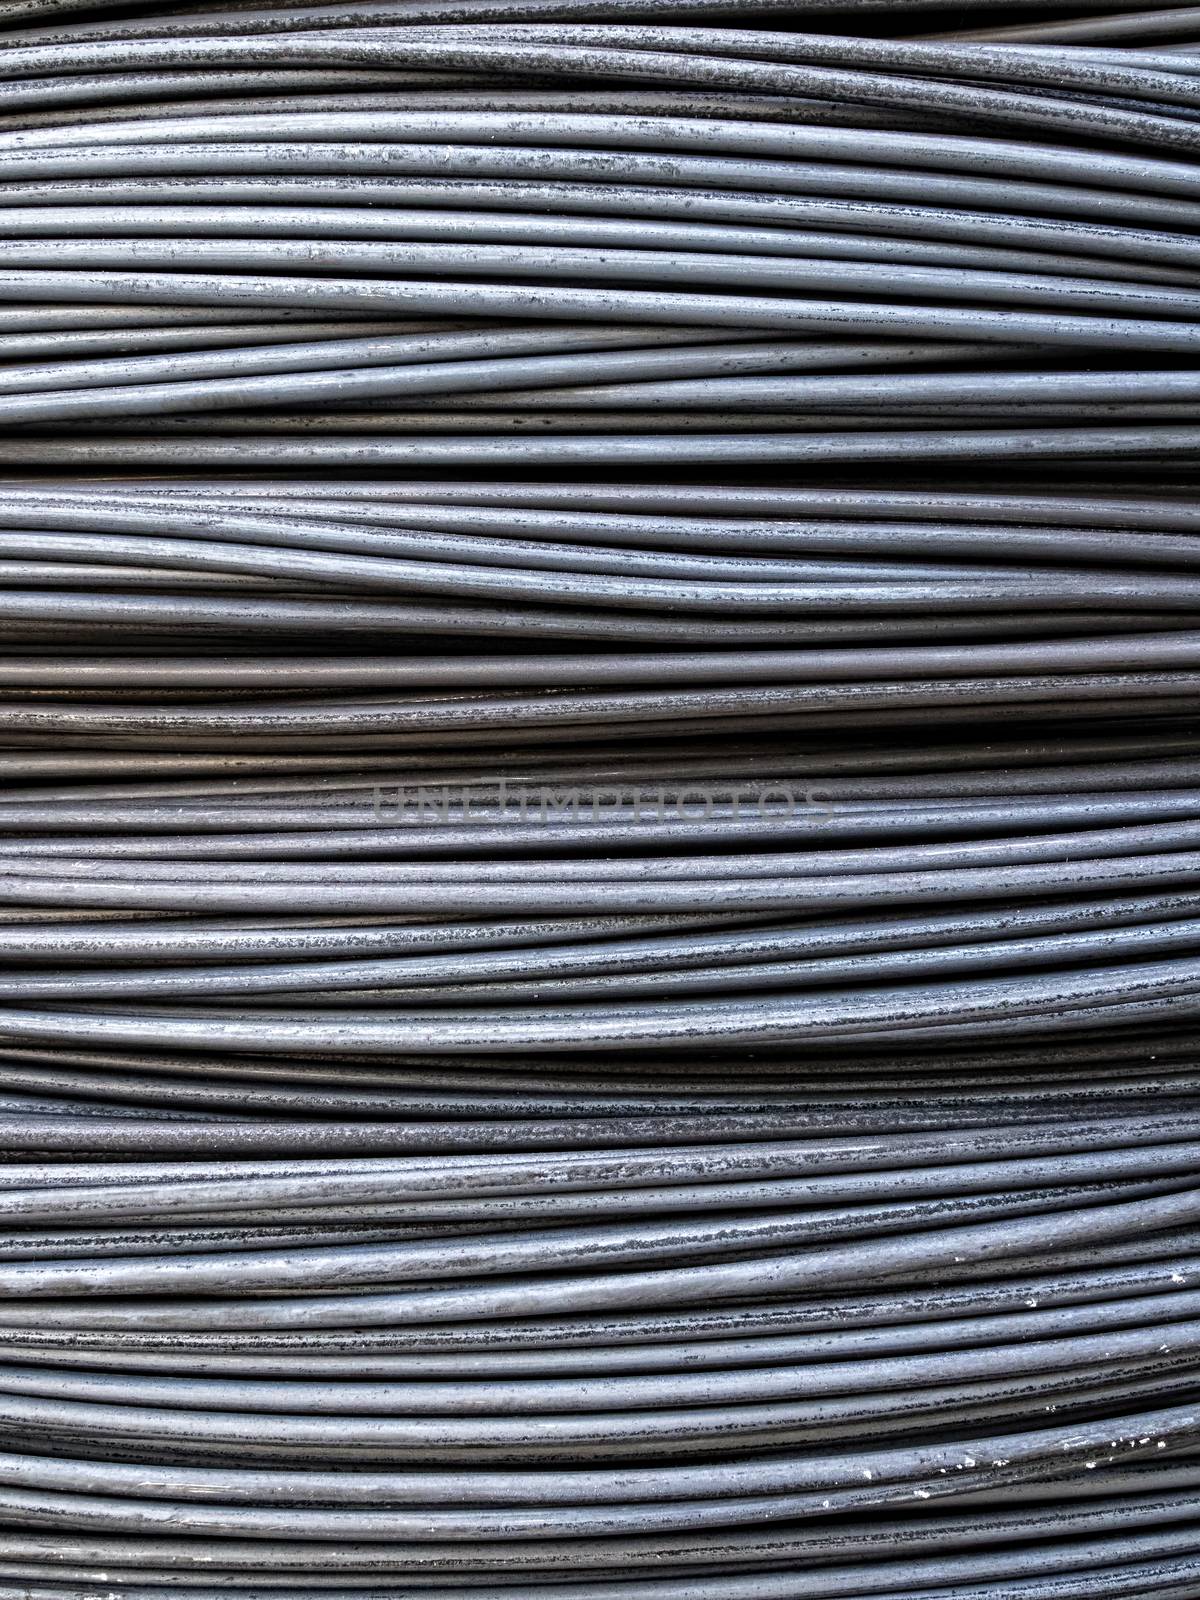 steel cable texture background by zkruger